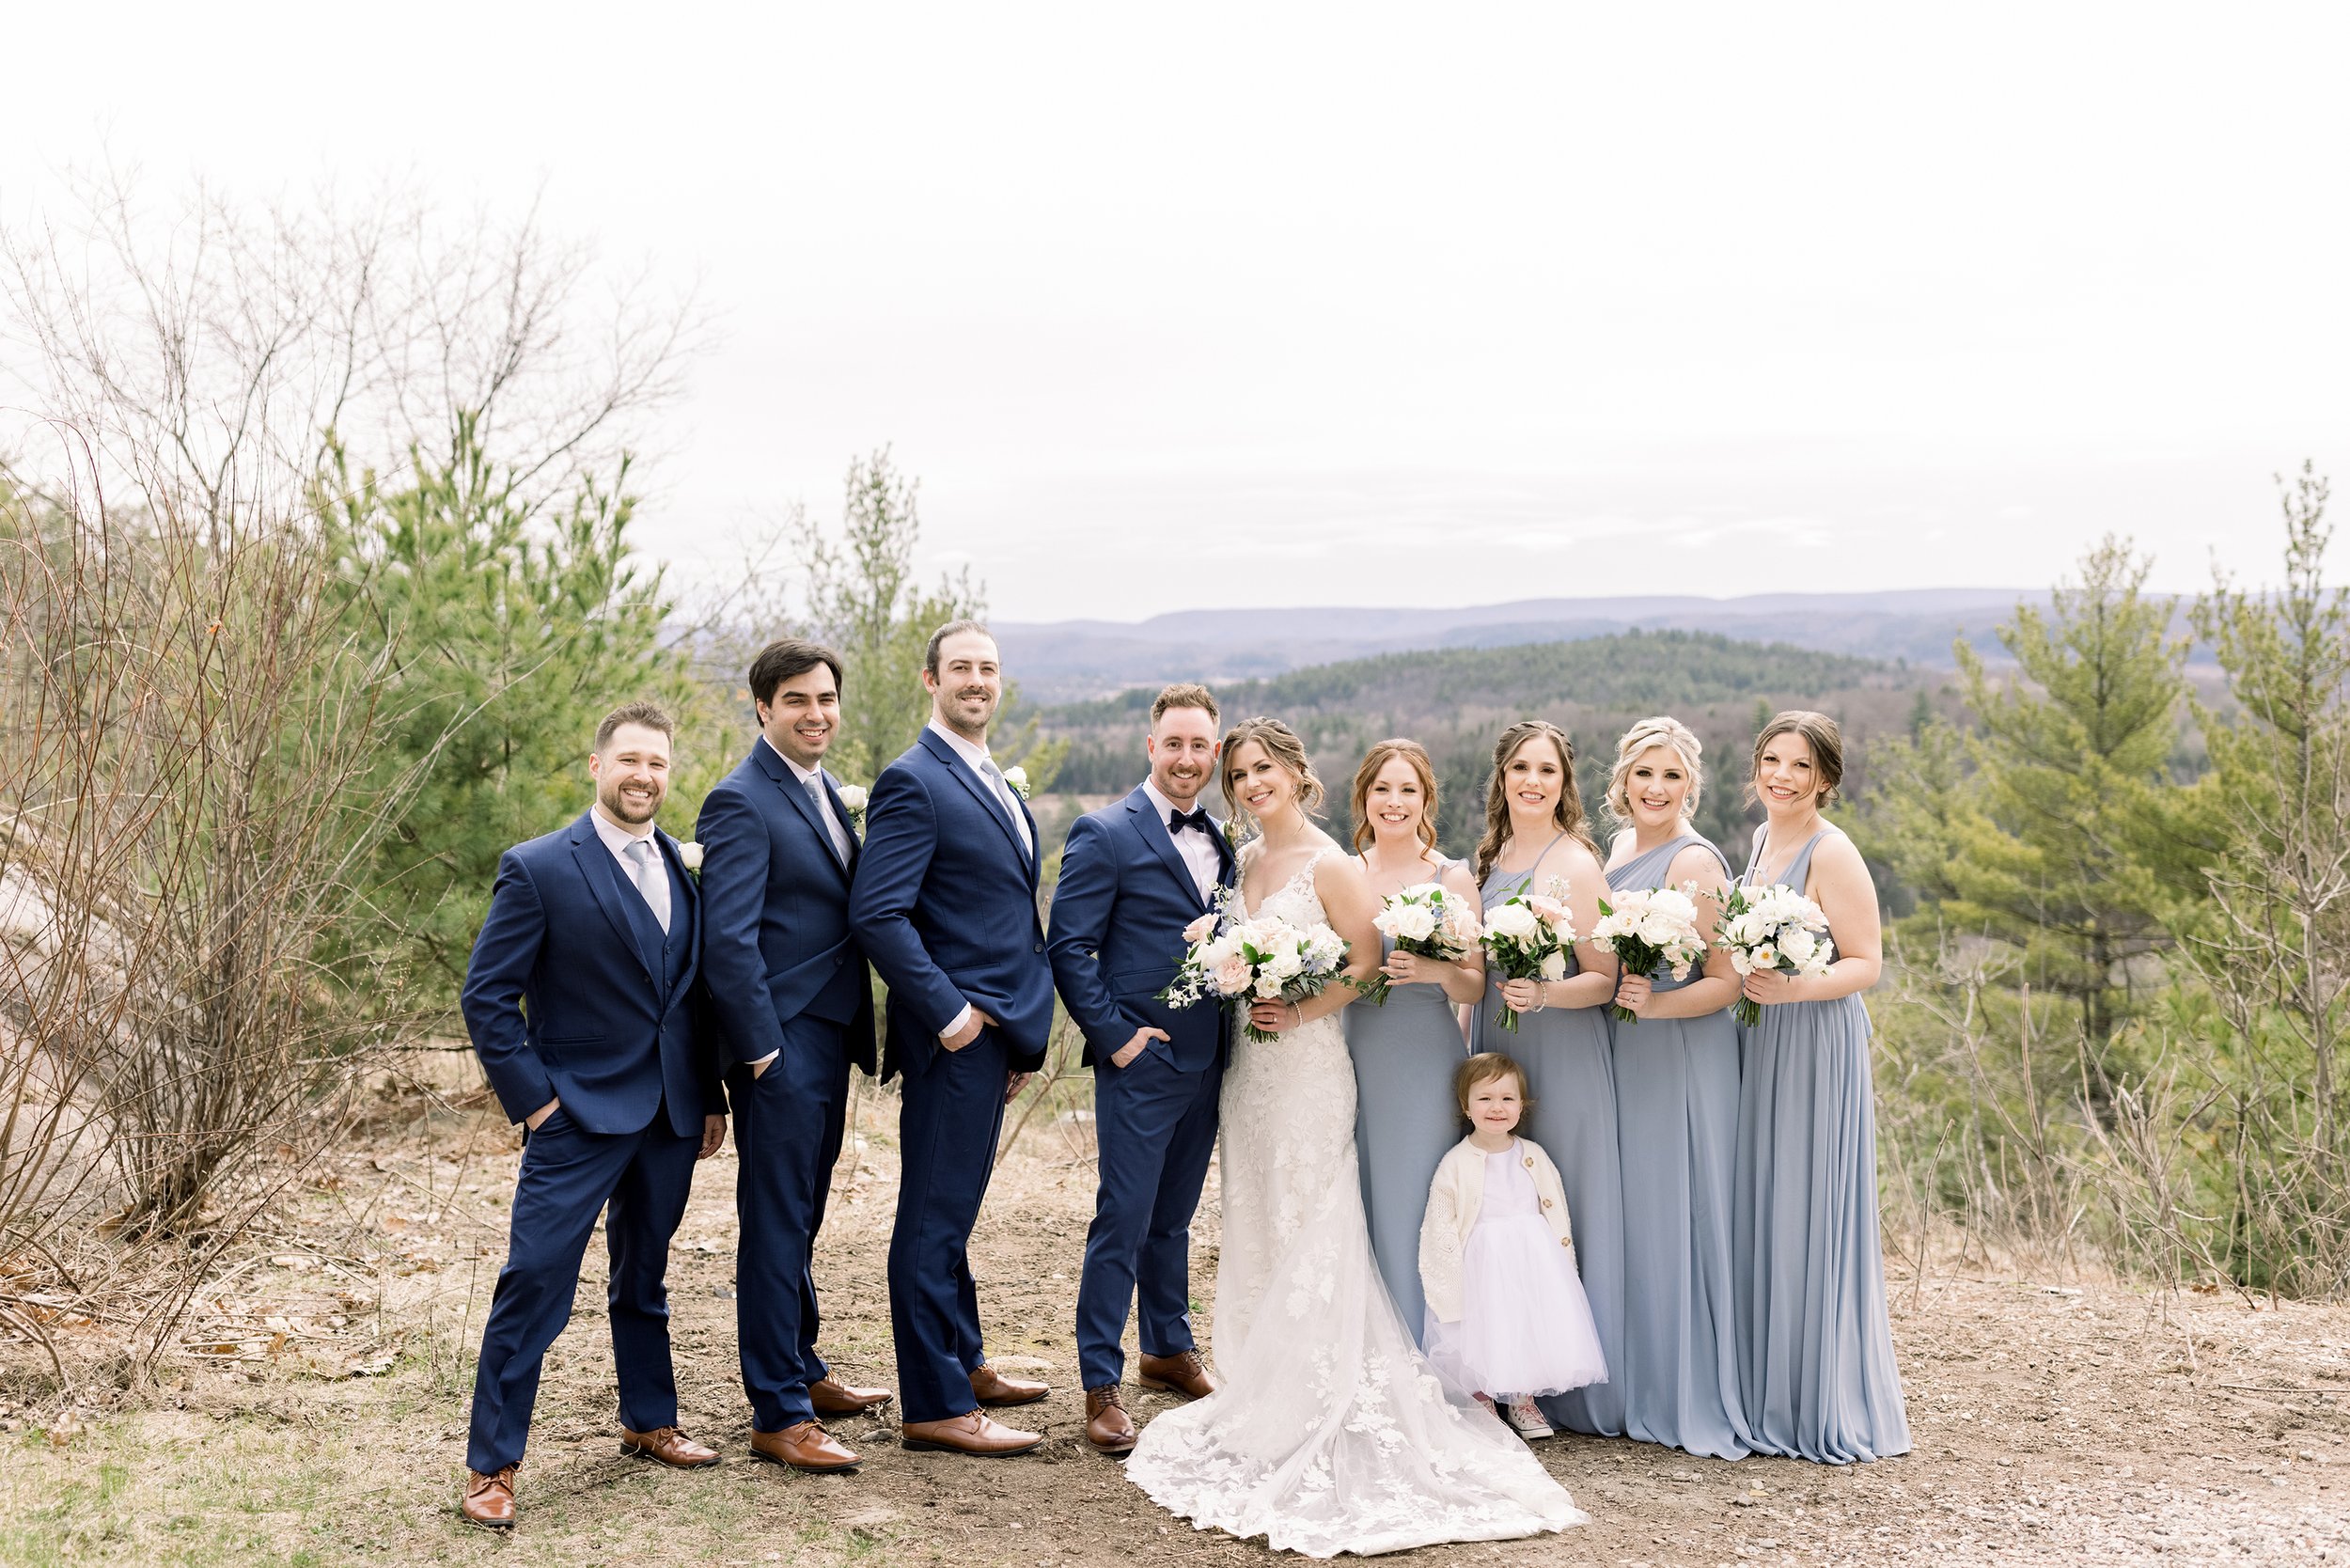  At Le Belvedere Chelsea Mason Photography captures a bridal party in navy and light blue laughing. blue summer wedding bridal party #ChelseaMasonPhotography #ChelseaMasonWeddings #WakefieldWeddings #LeBelvedere #Wakefieldweddingphotographers 